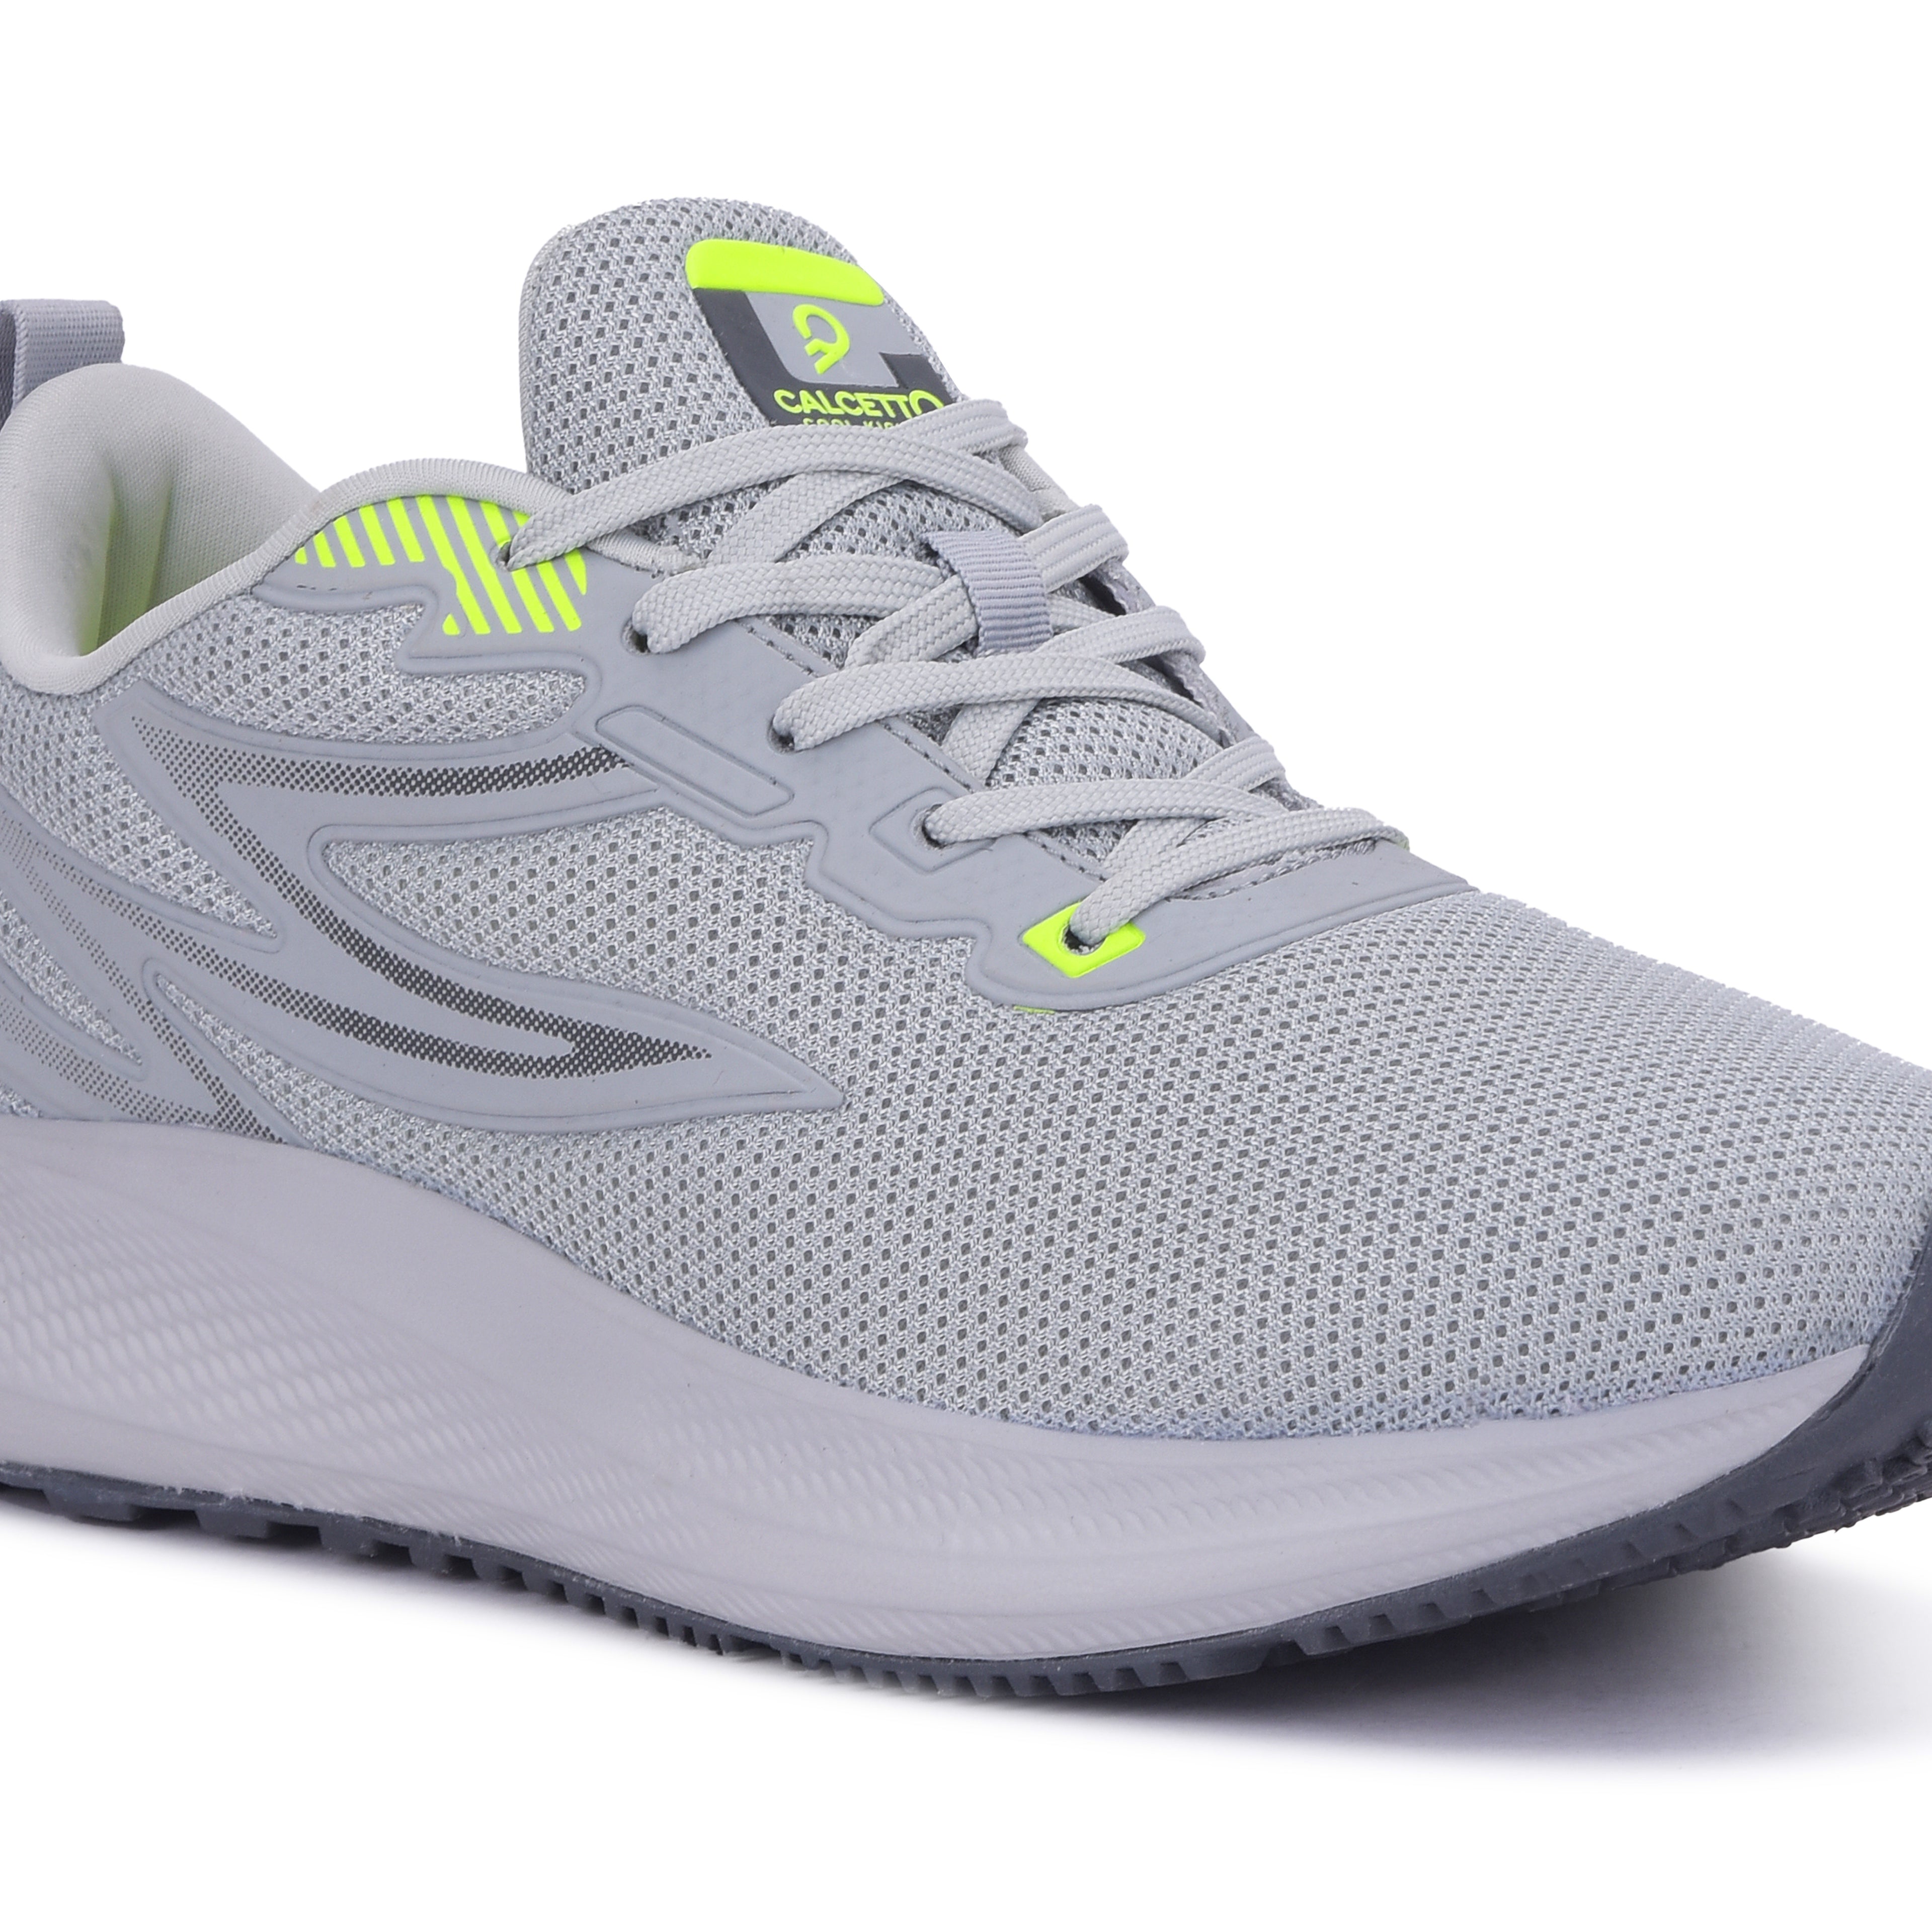 Calcetto CLT-2011 L Grey Running Shoes For Men